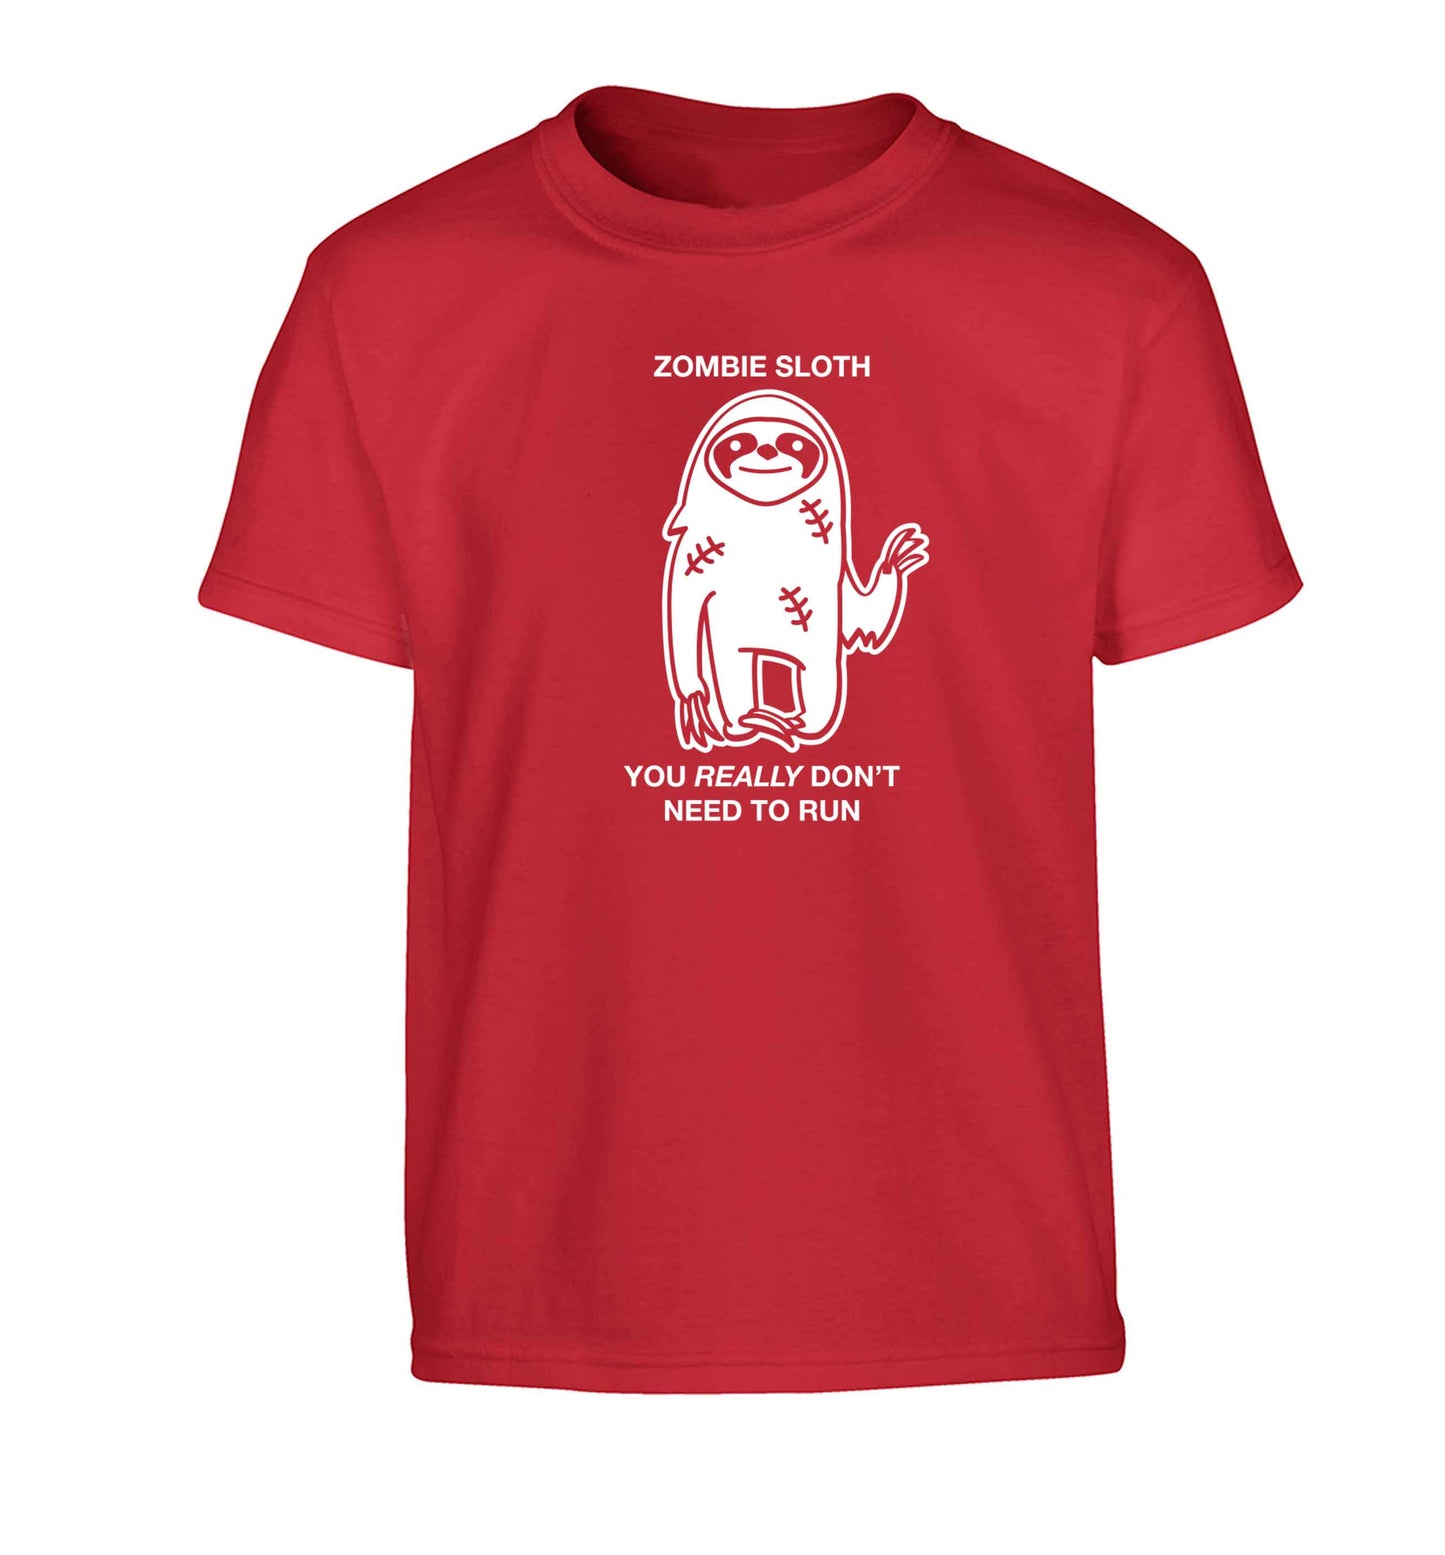 Zombie sloth you really don't need to run Children's red Tshirt 12-13 Years